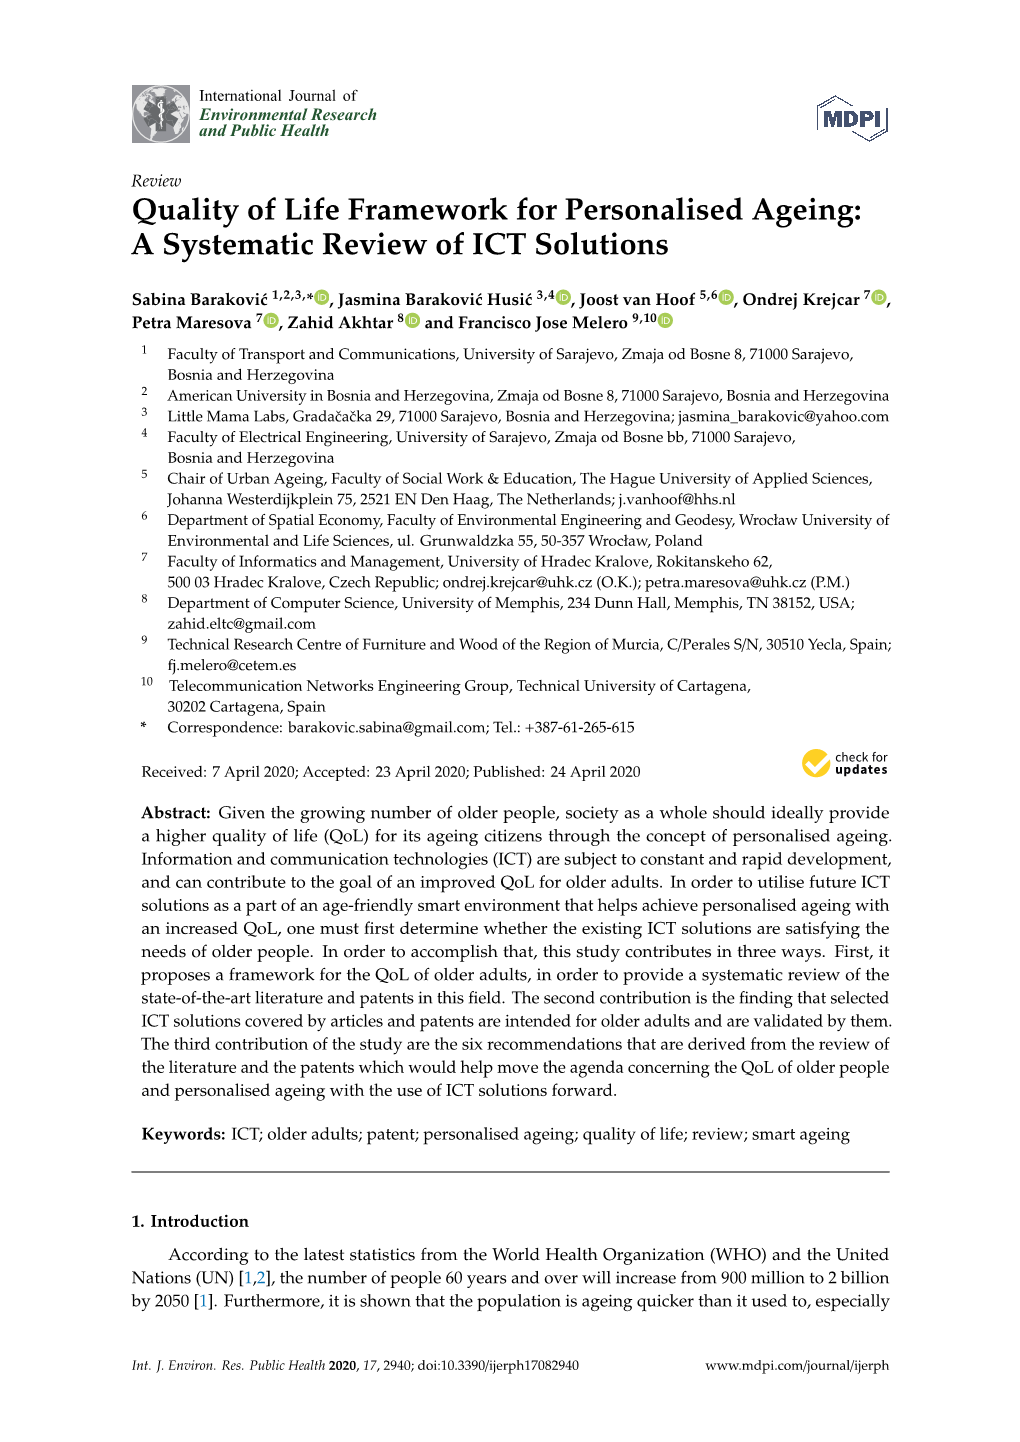 Quality of Life Framework for Personalised Ageing: a Systematic Review of ICT Solutions